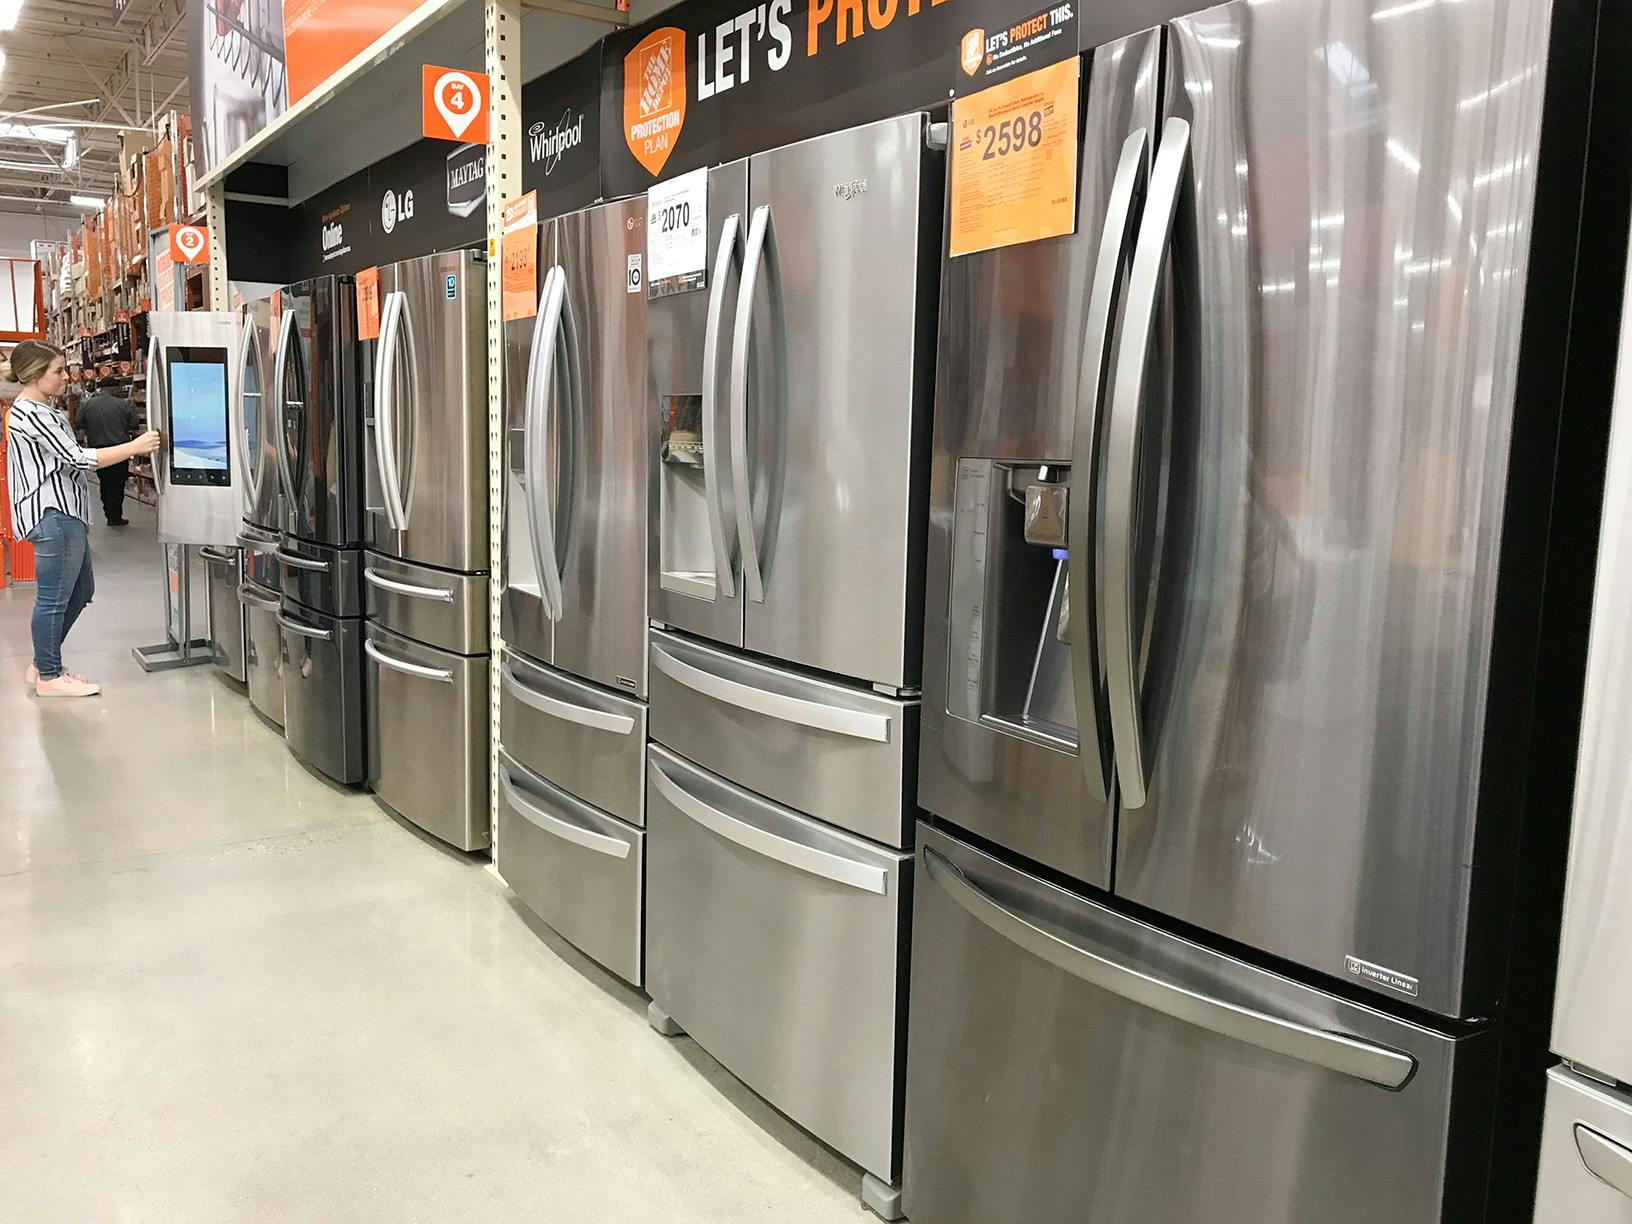 A person looking at a refrigerator at the end of a row of refrigerators on display at Home Depot.